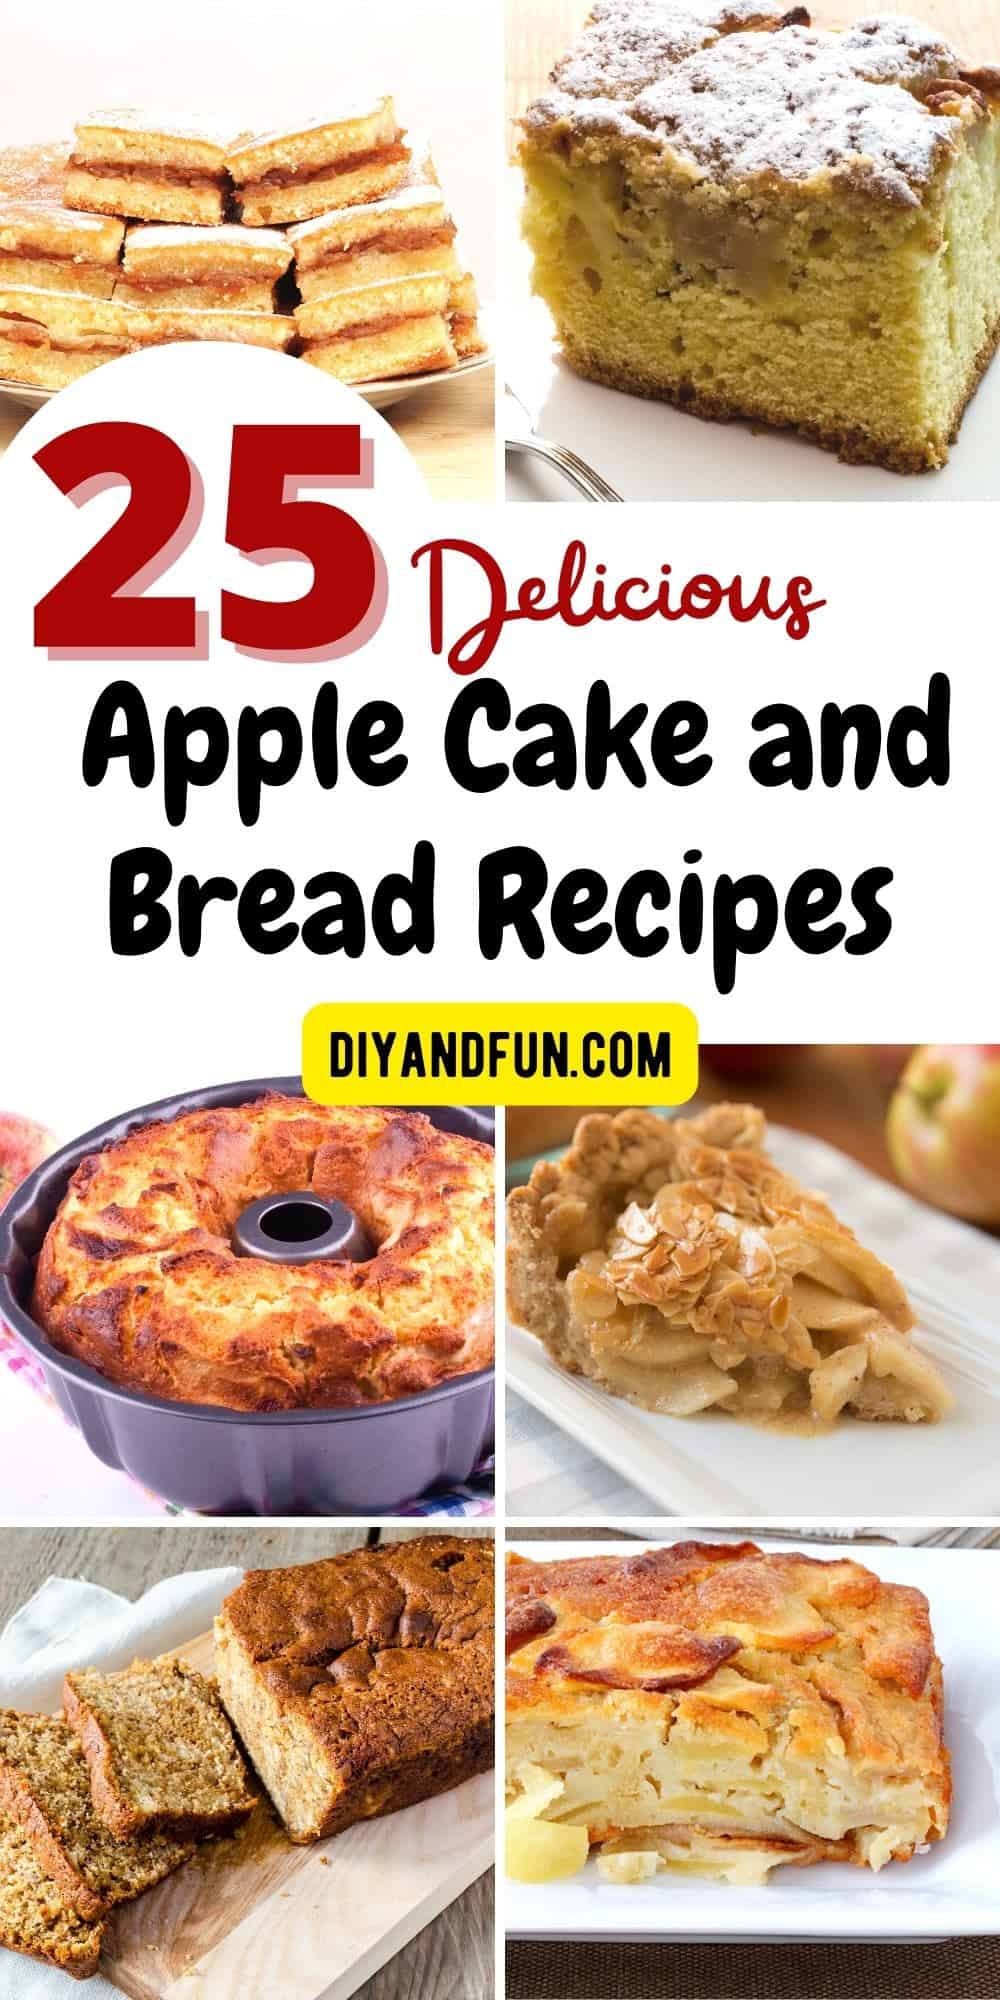 25 Delicious Apple Cake and Bread Recipes, tasty recipes including sugar free, Mediterranean diet, and cheesecakes.